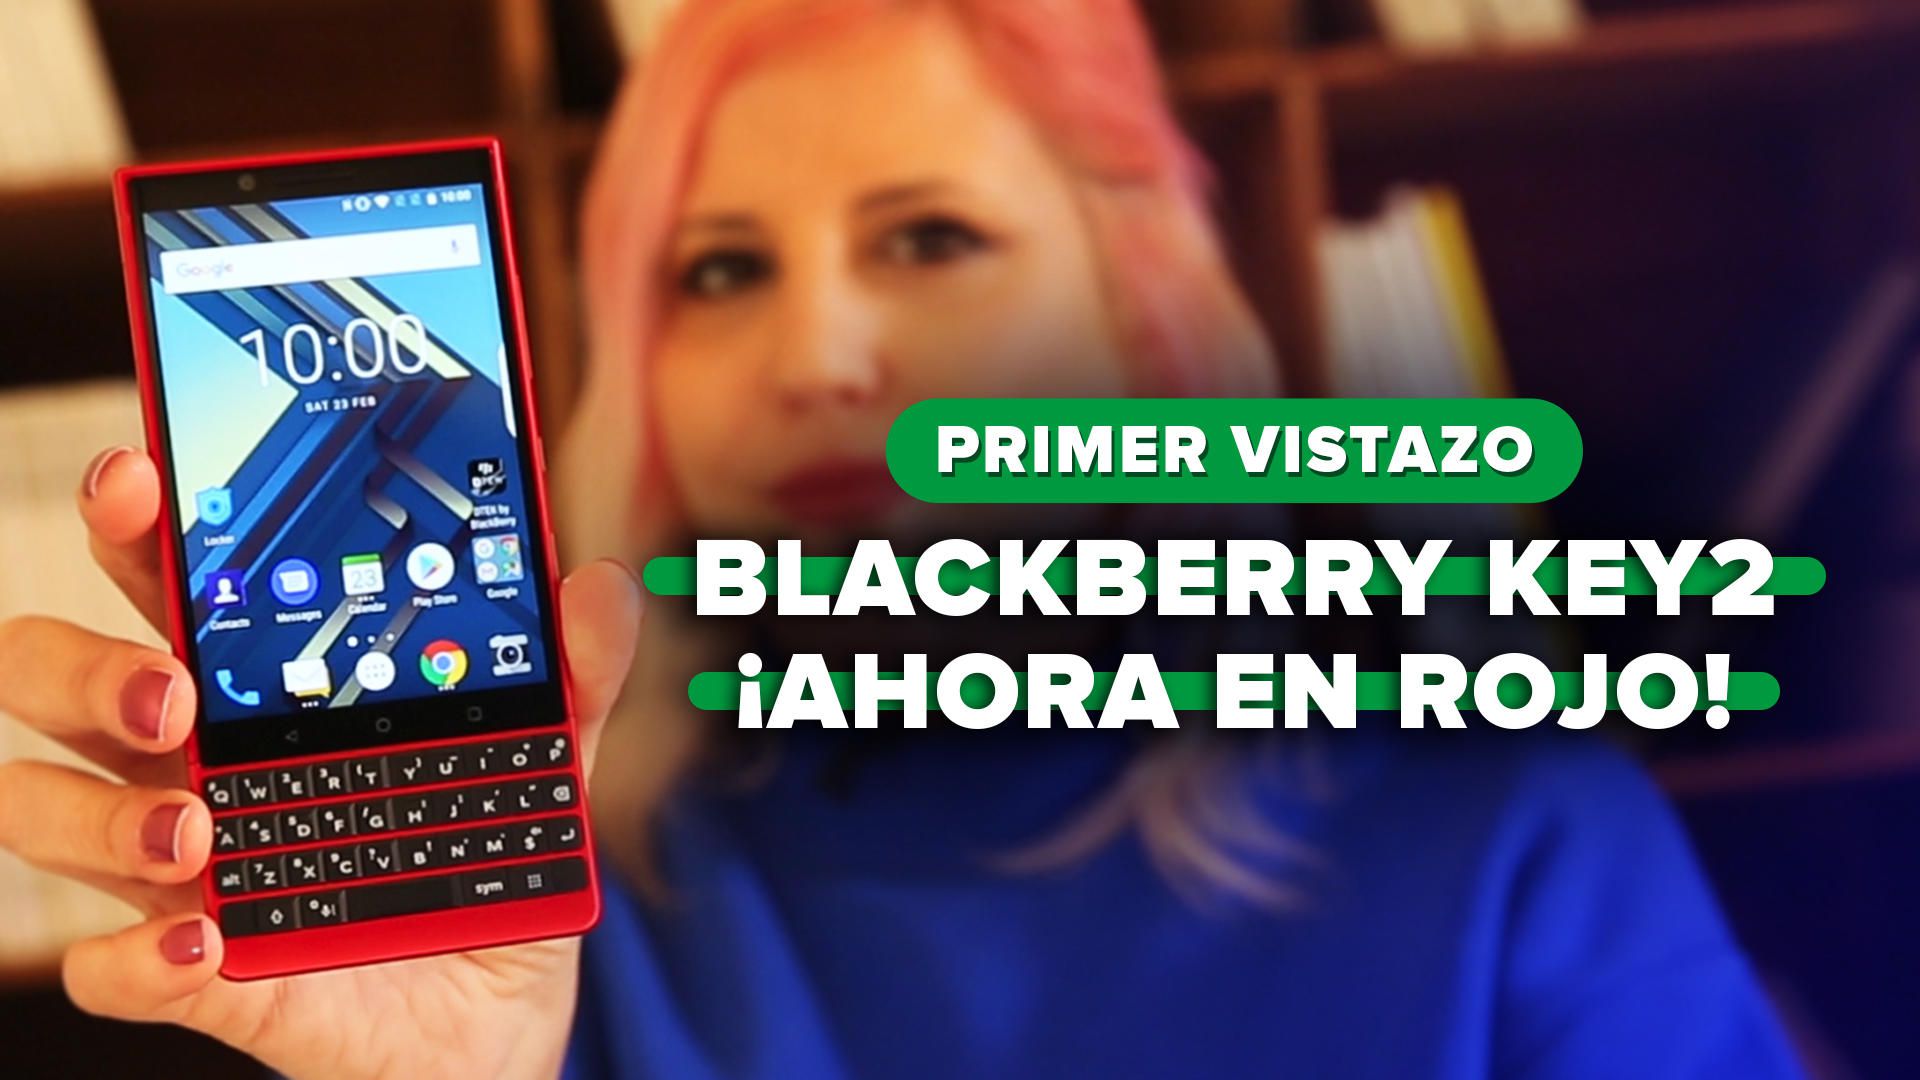 BlackBerry Red Edition: More memory and a color that does not go unnoticed - Video